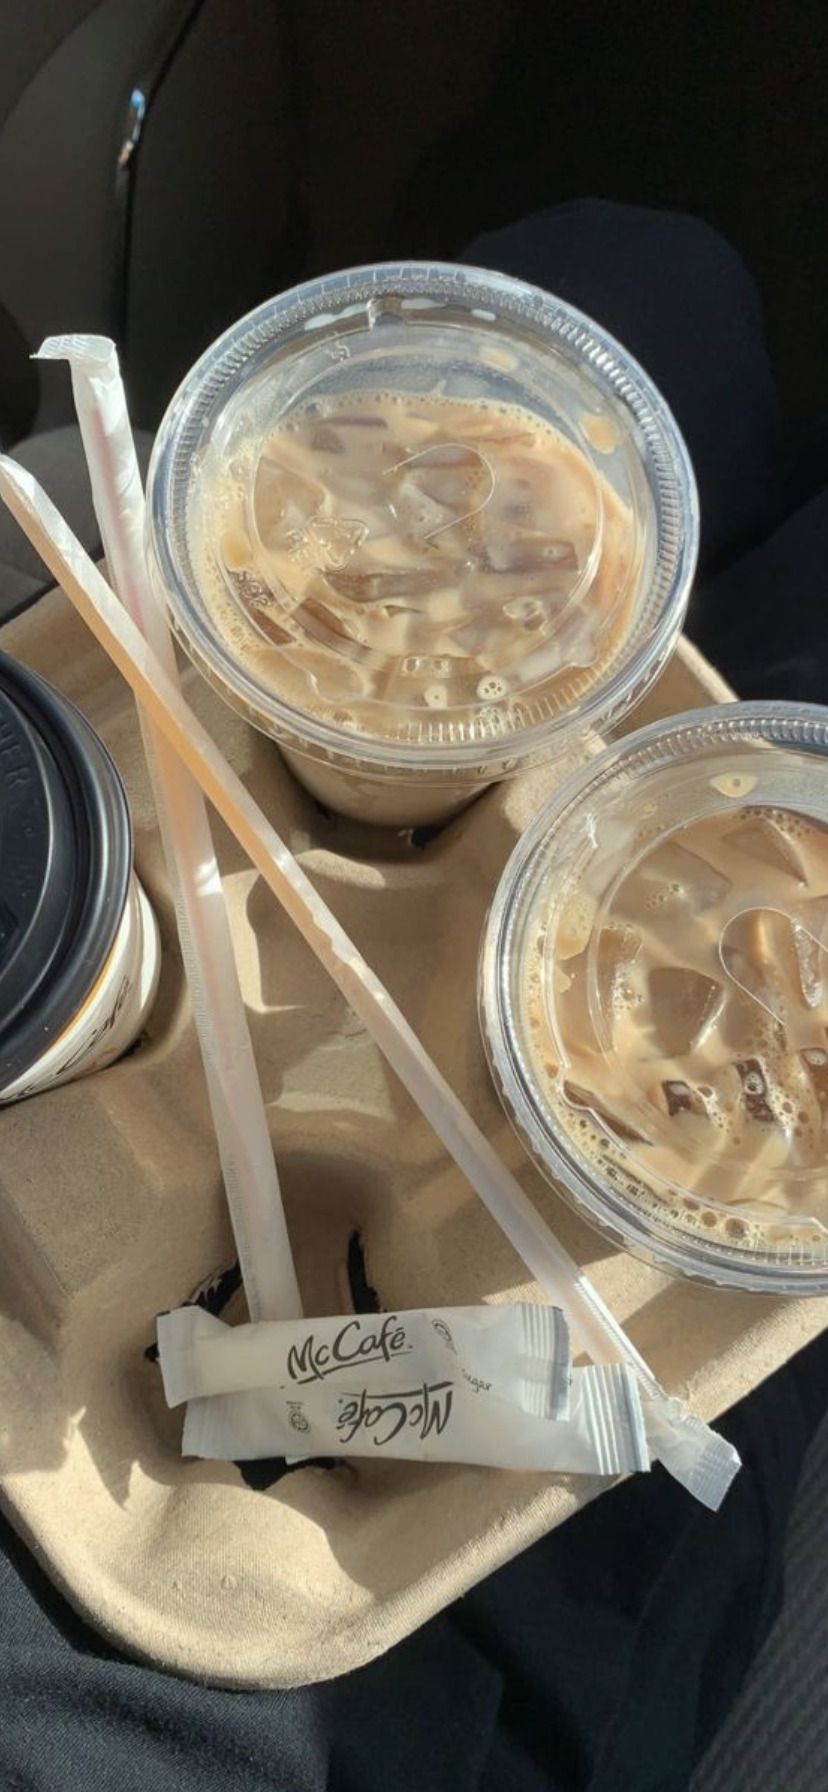 A tray of food with straws and cups - Coffee